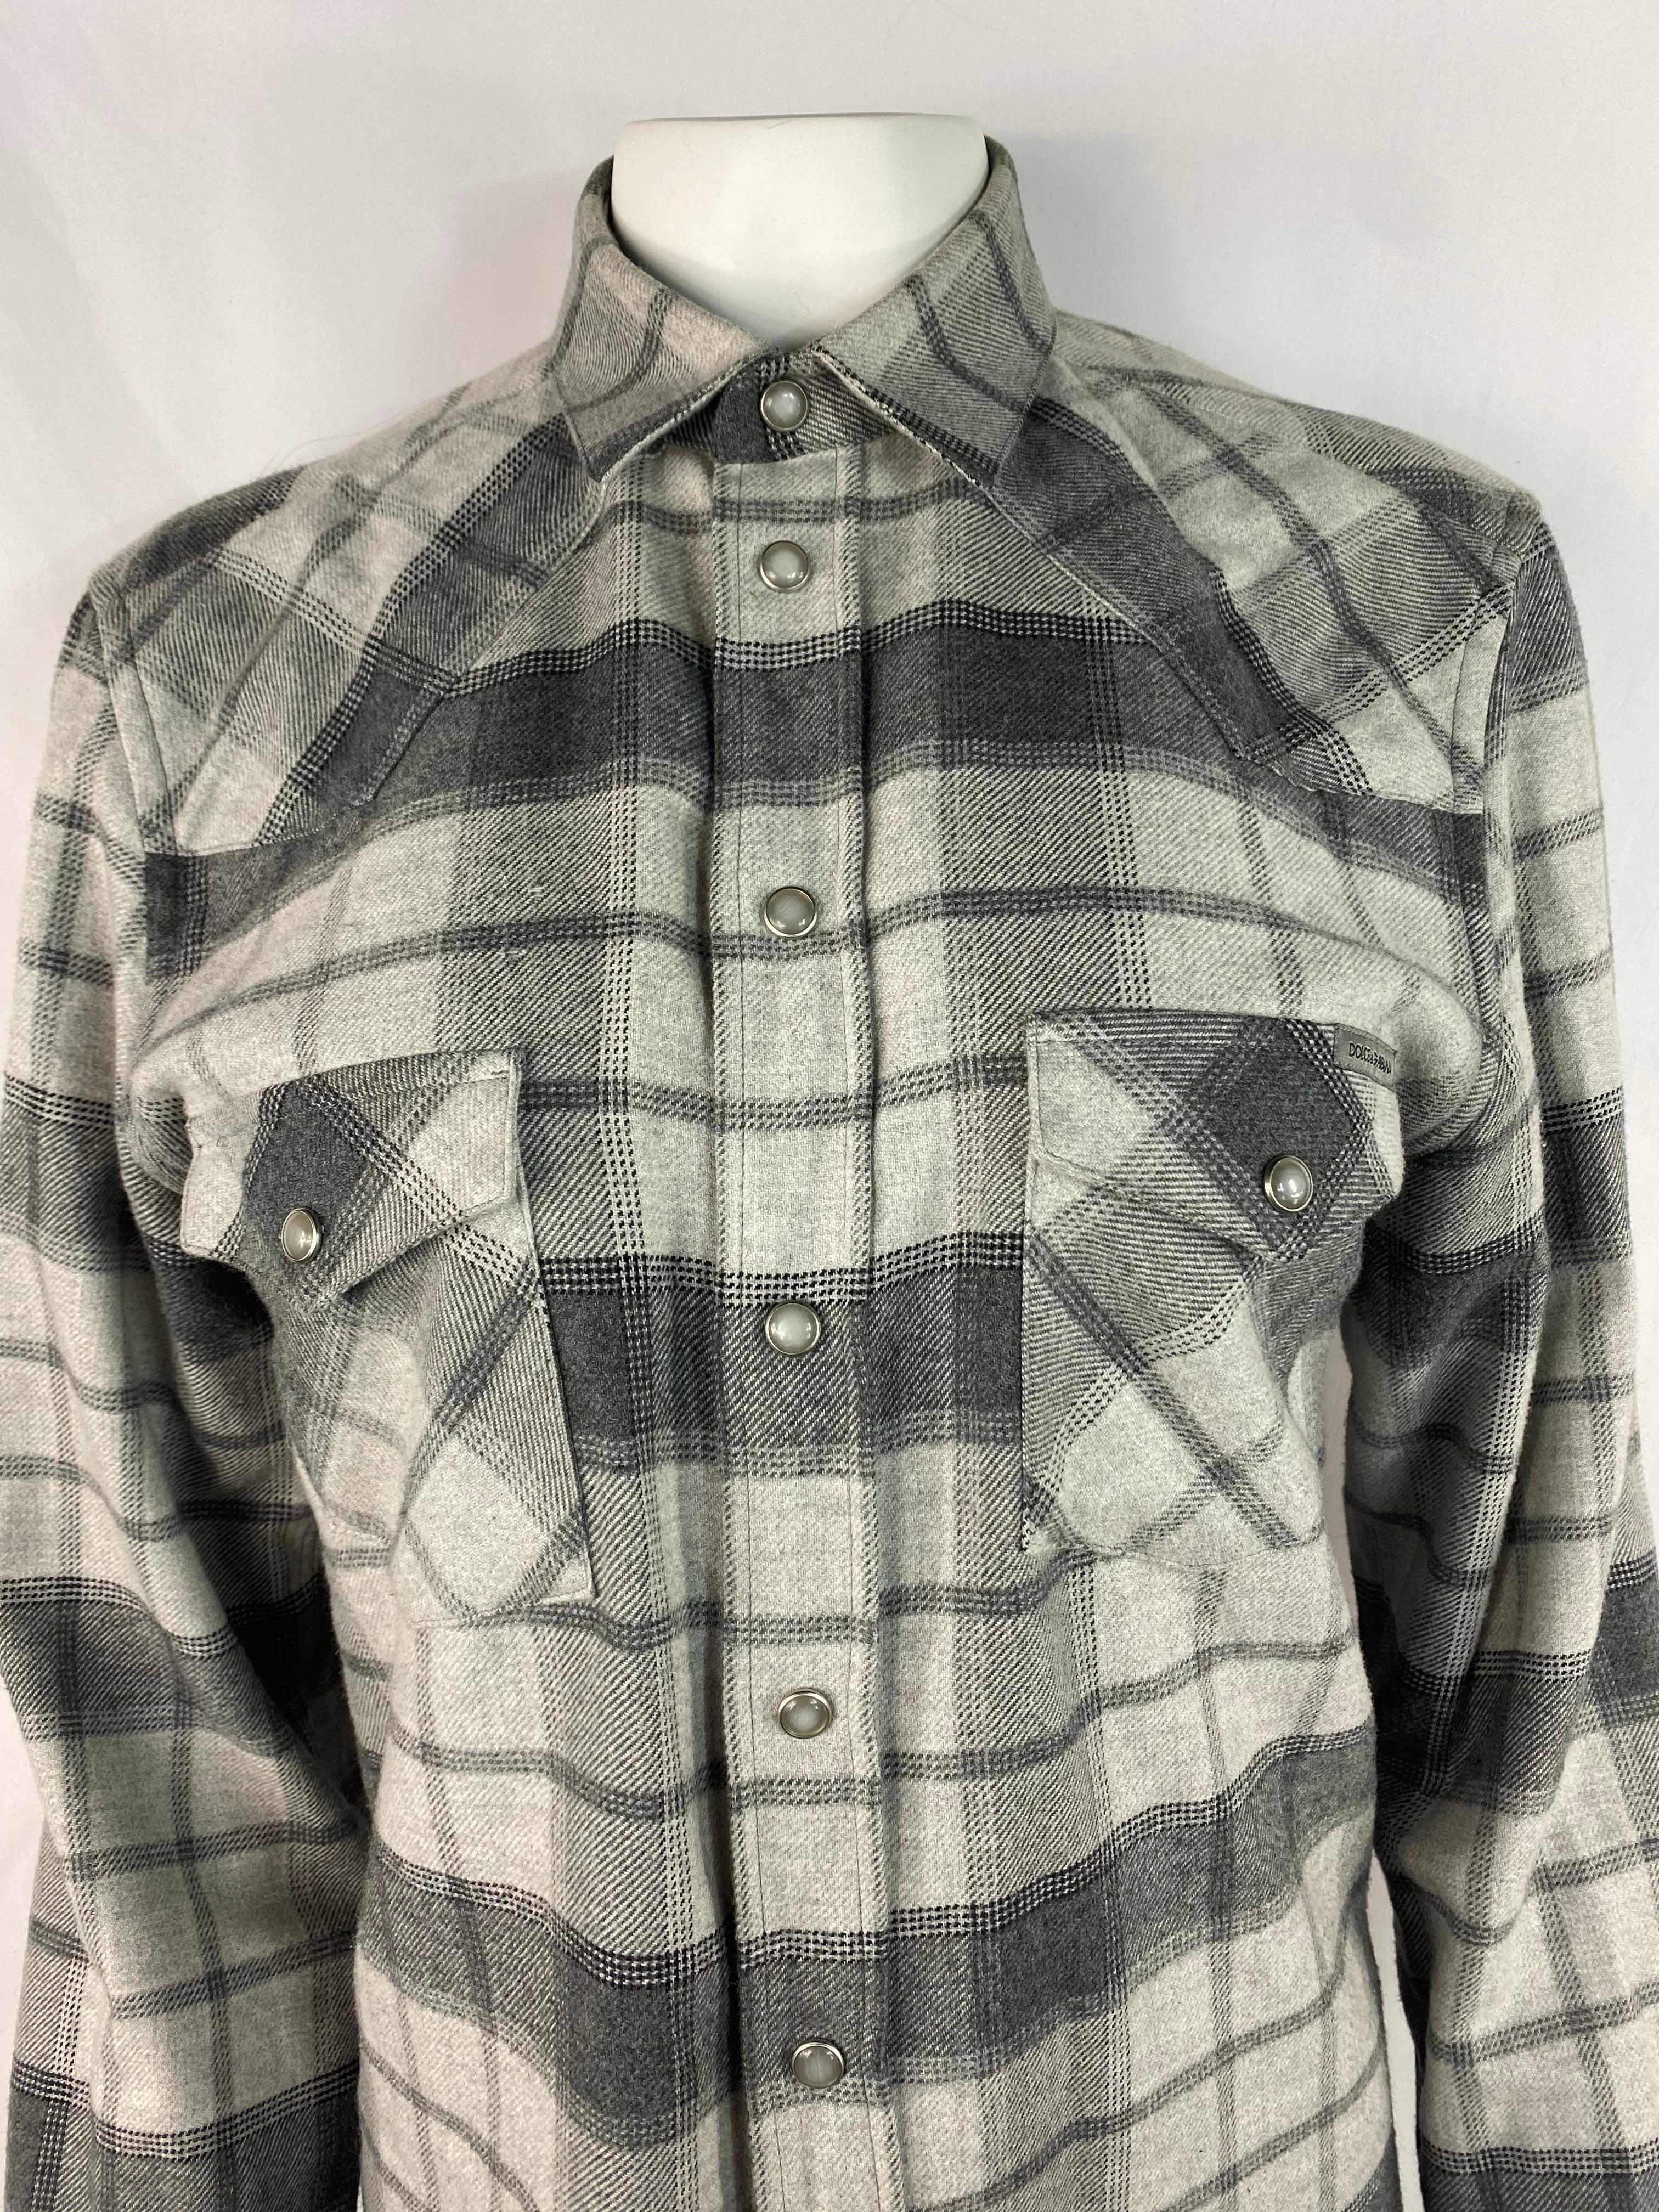 Product details:

The shirt features grey color palette with check/ plaid print and dual front pocket detail. Made in Italy.